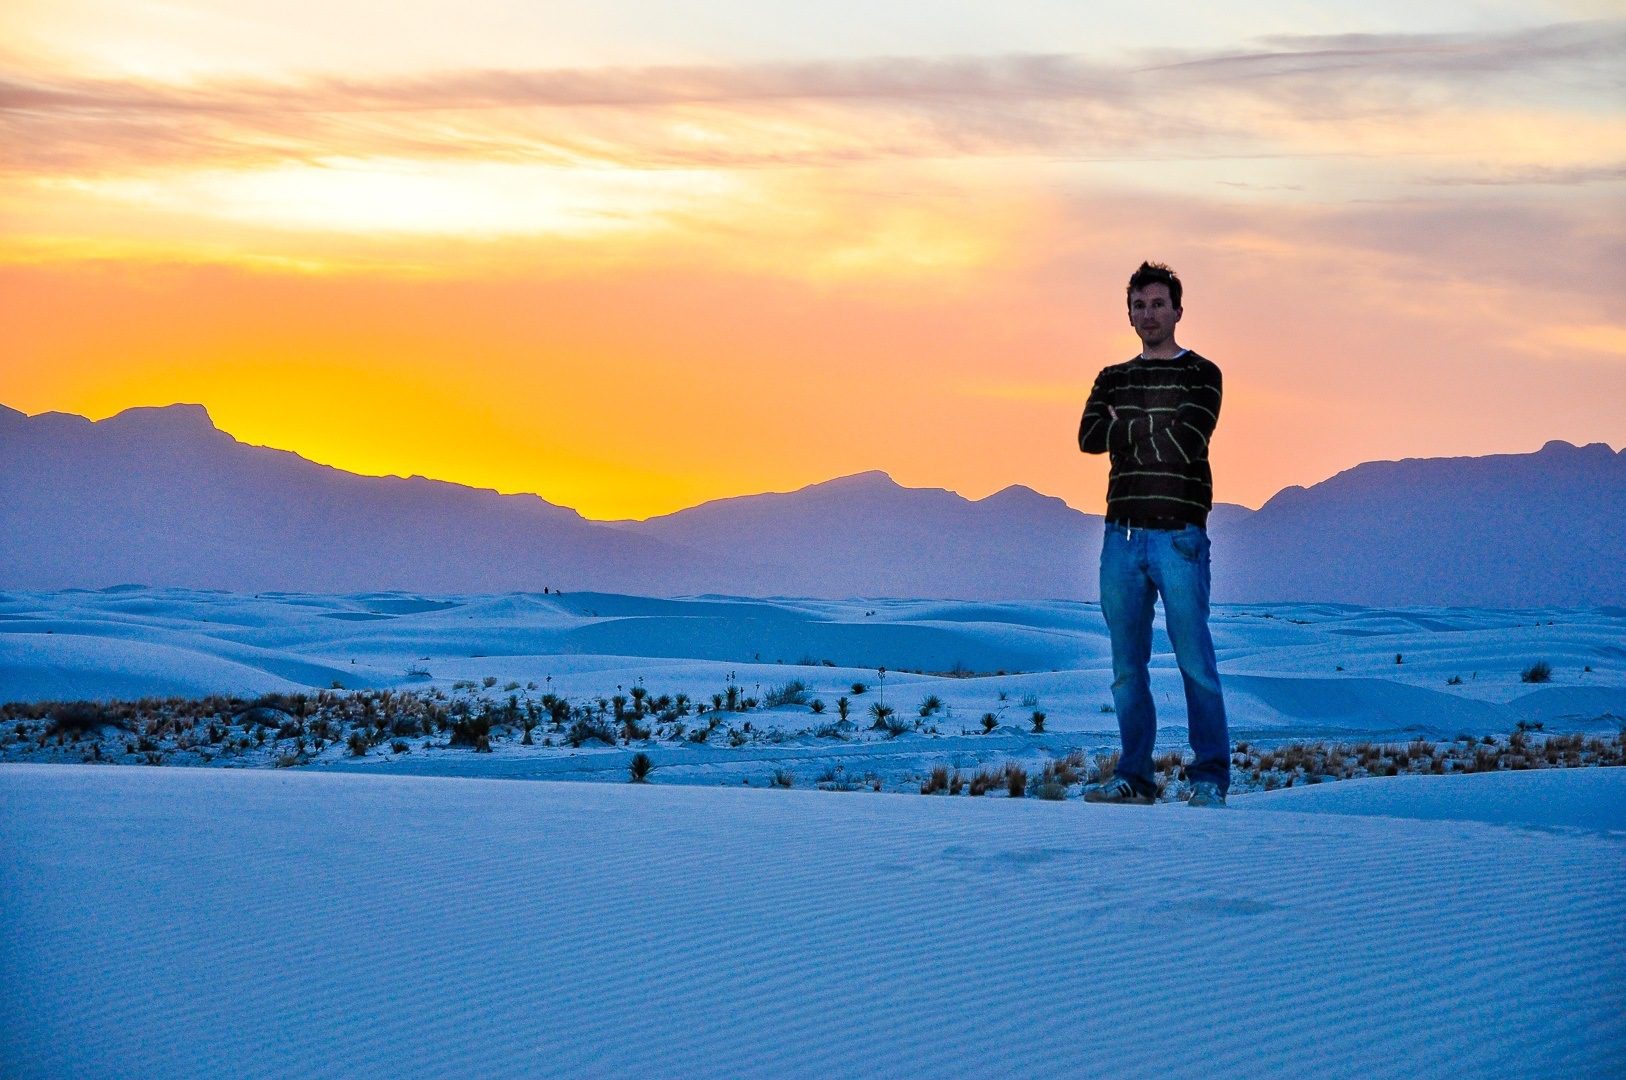 White Sands National Monument in New Mexico at sunset.